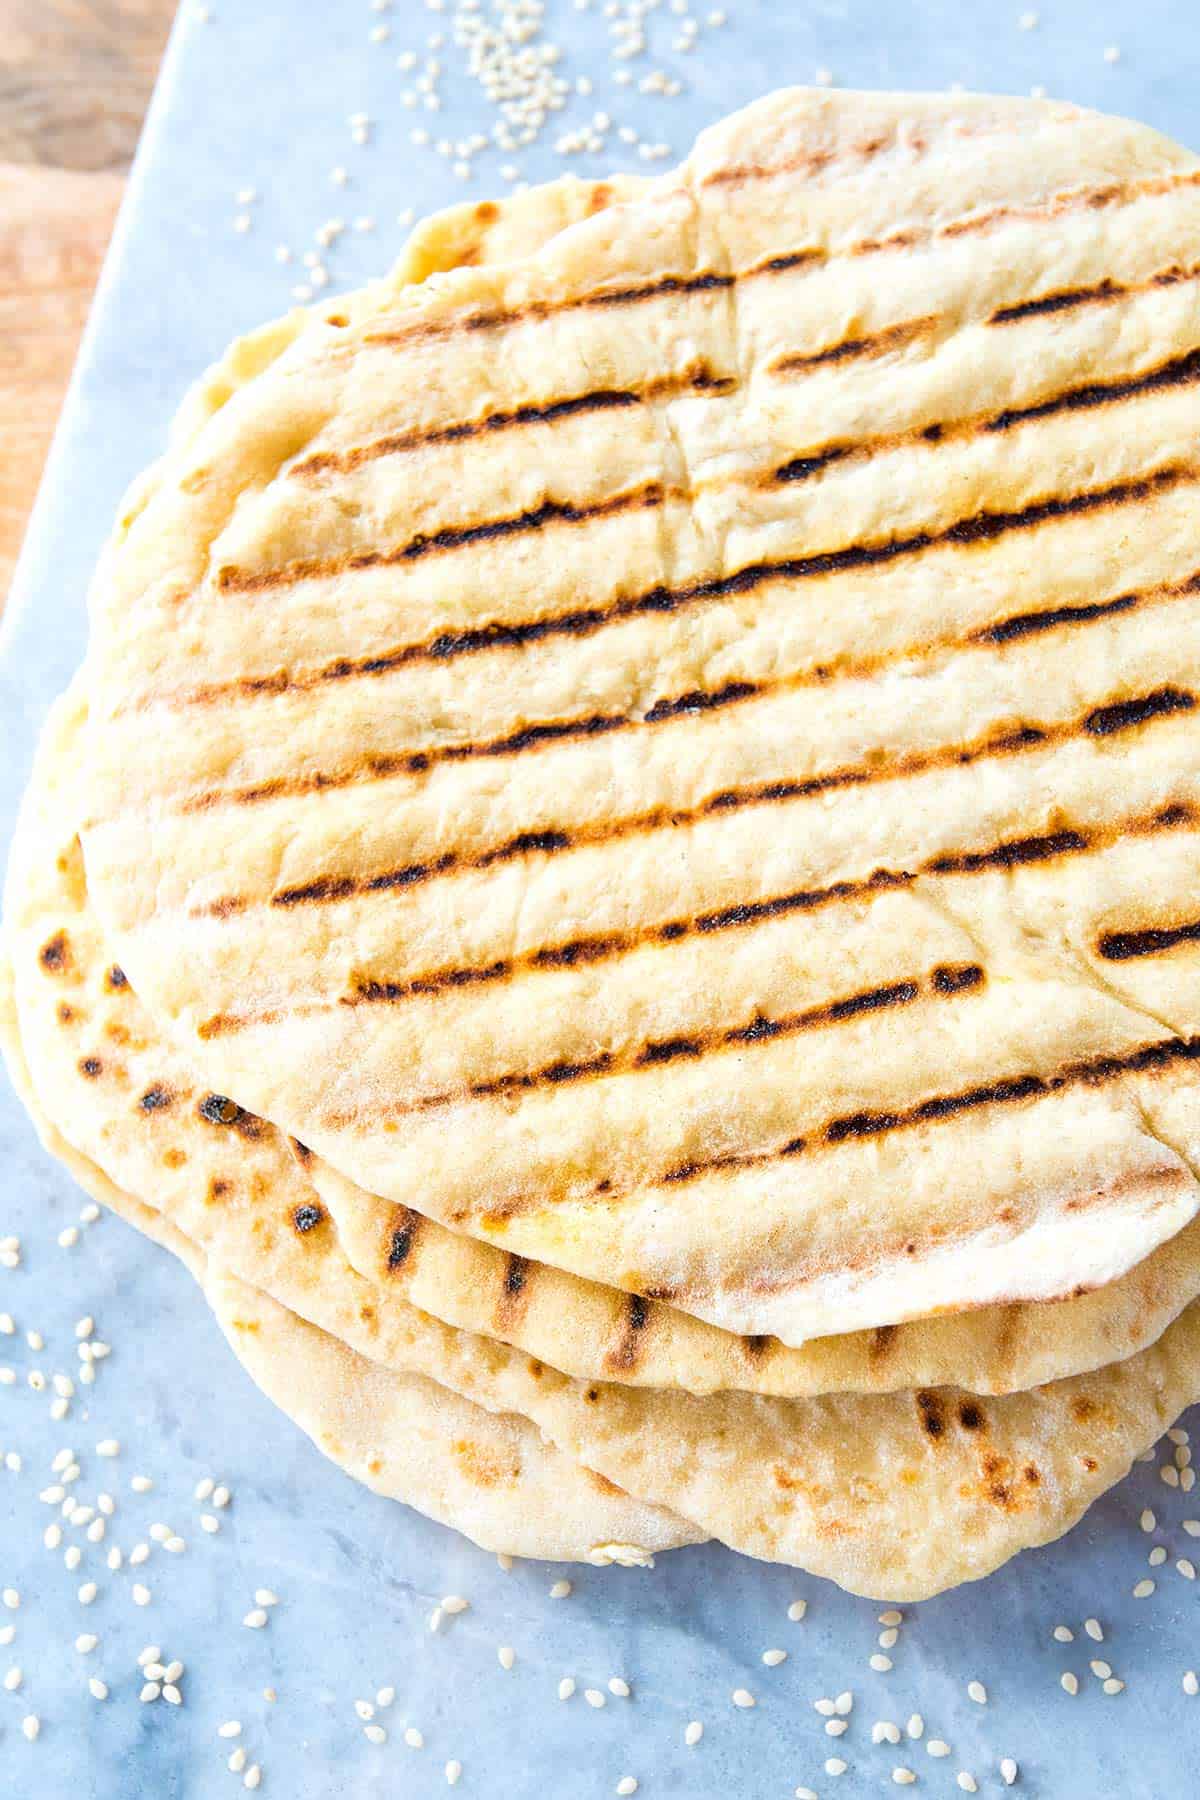 With a few simple ingredients and about 1 hour of hands-off proofing time, you can make soft and fluffy flatbread from scratch.